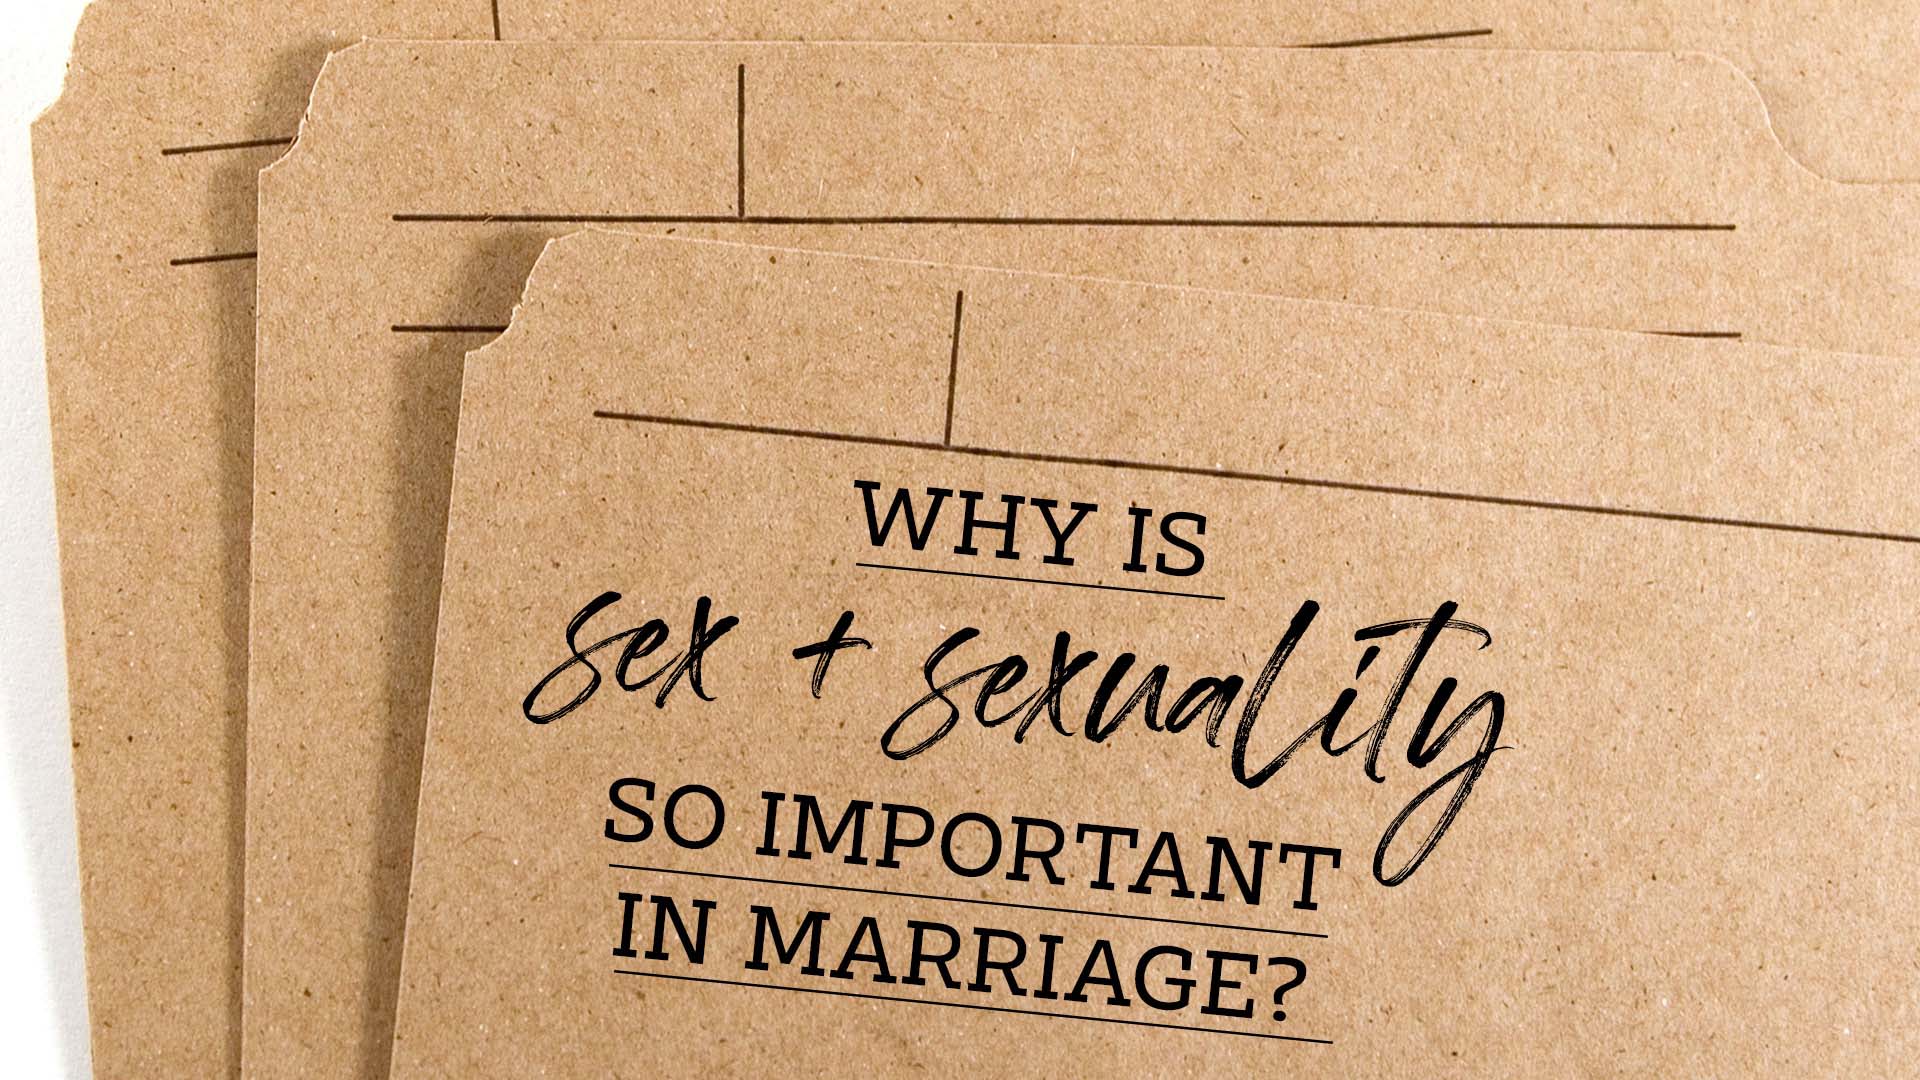 Why Is Sex and Sexuality So Important To Our Identity?